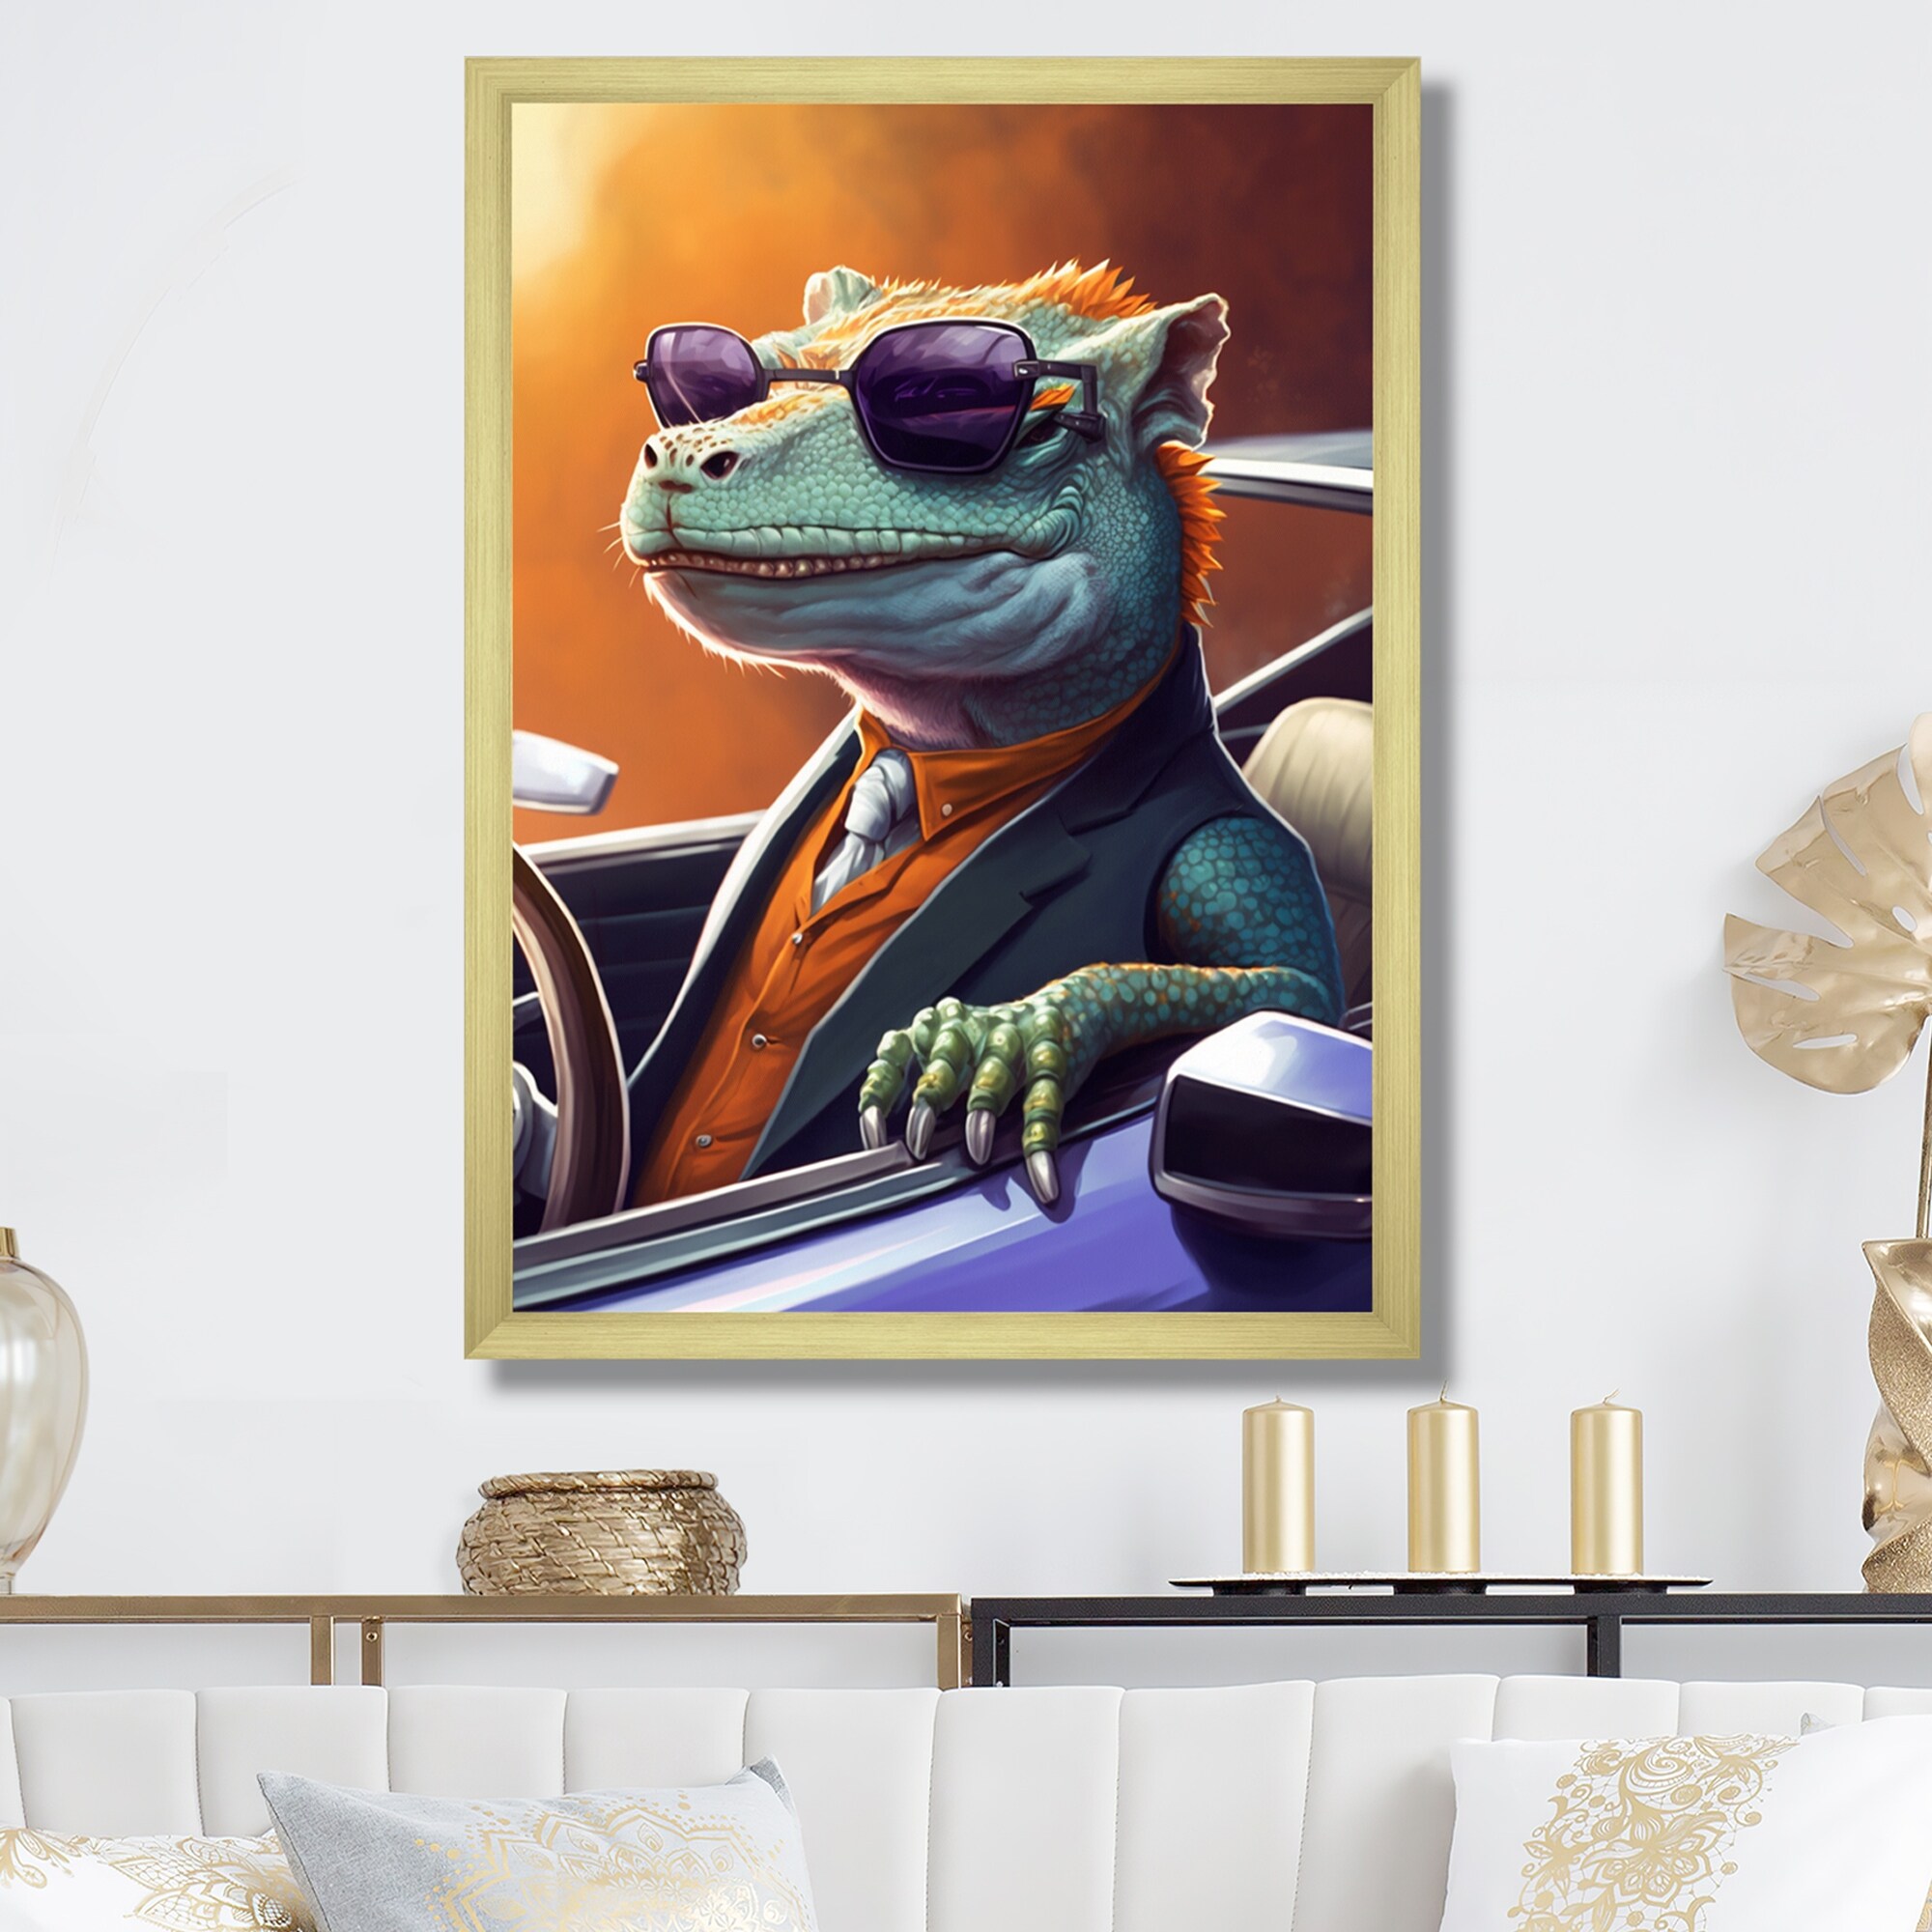 30x40 inches ART PRINT with frame size perpective, visionairess